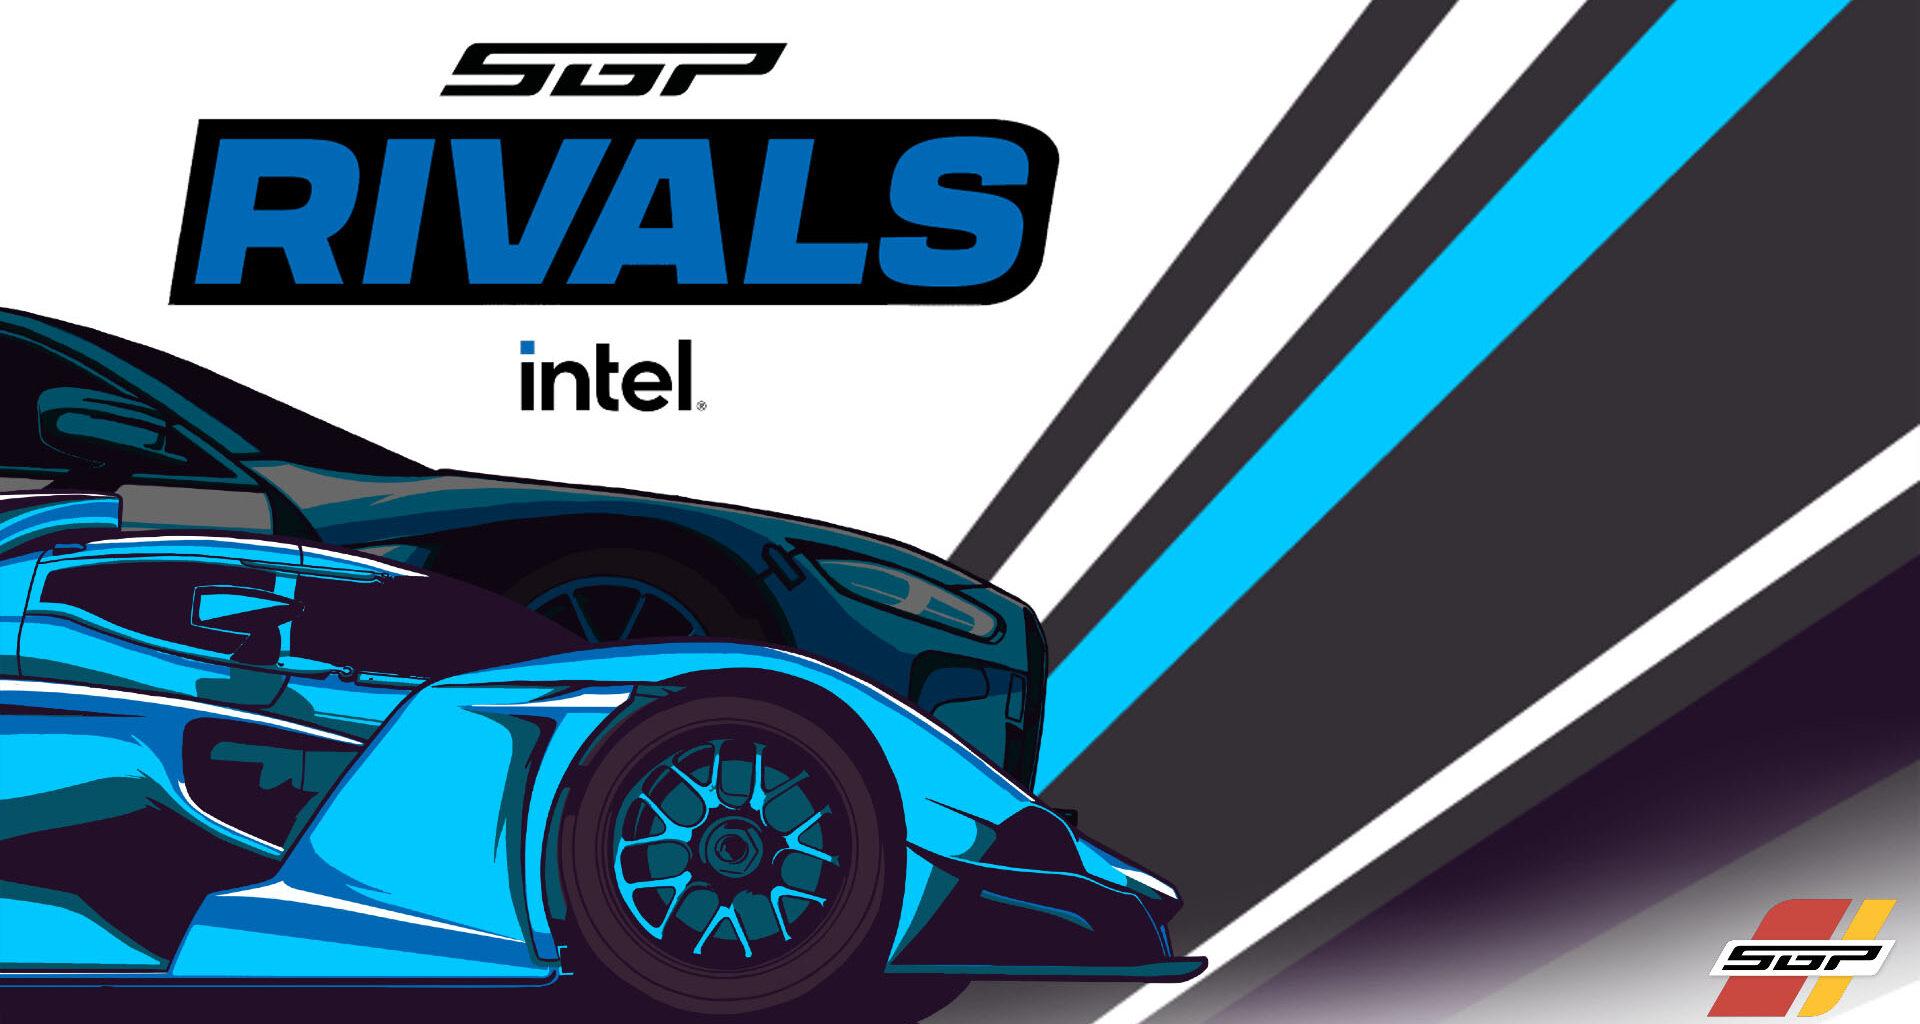 SimracingGP partners with Intel, founds Rivals sim racing competition